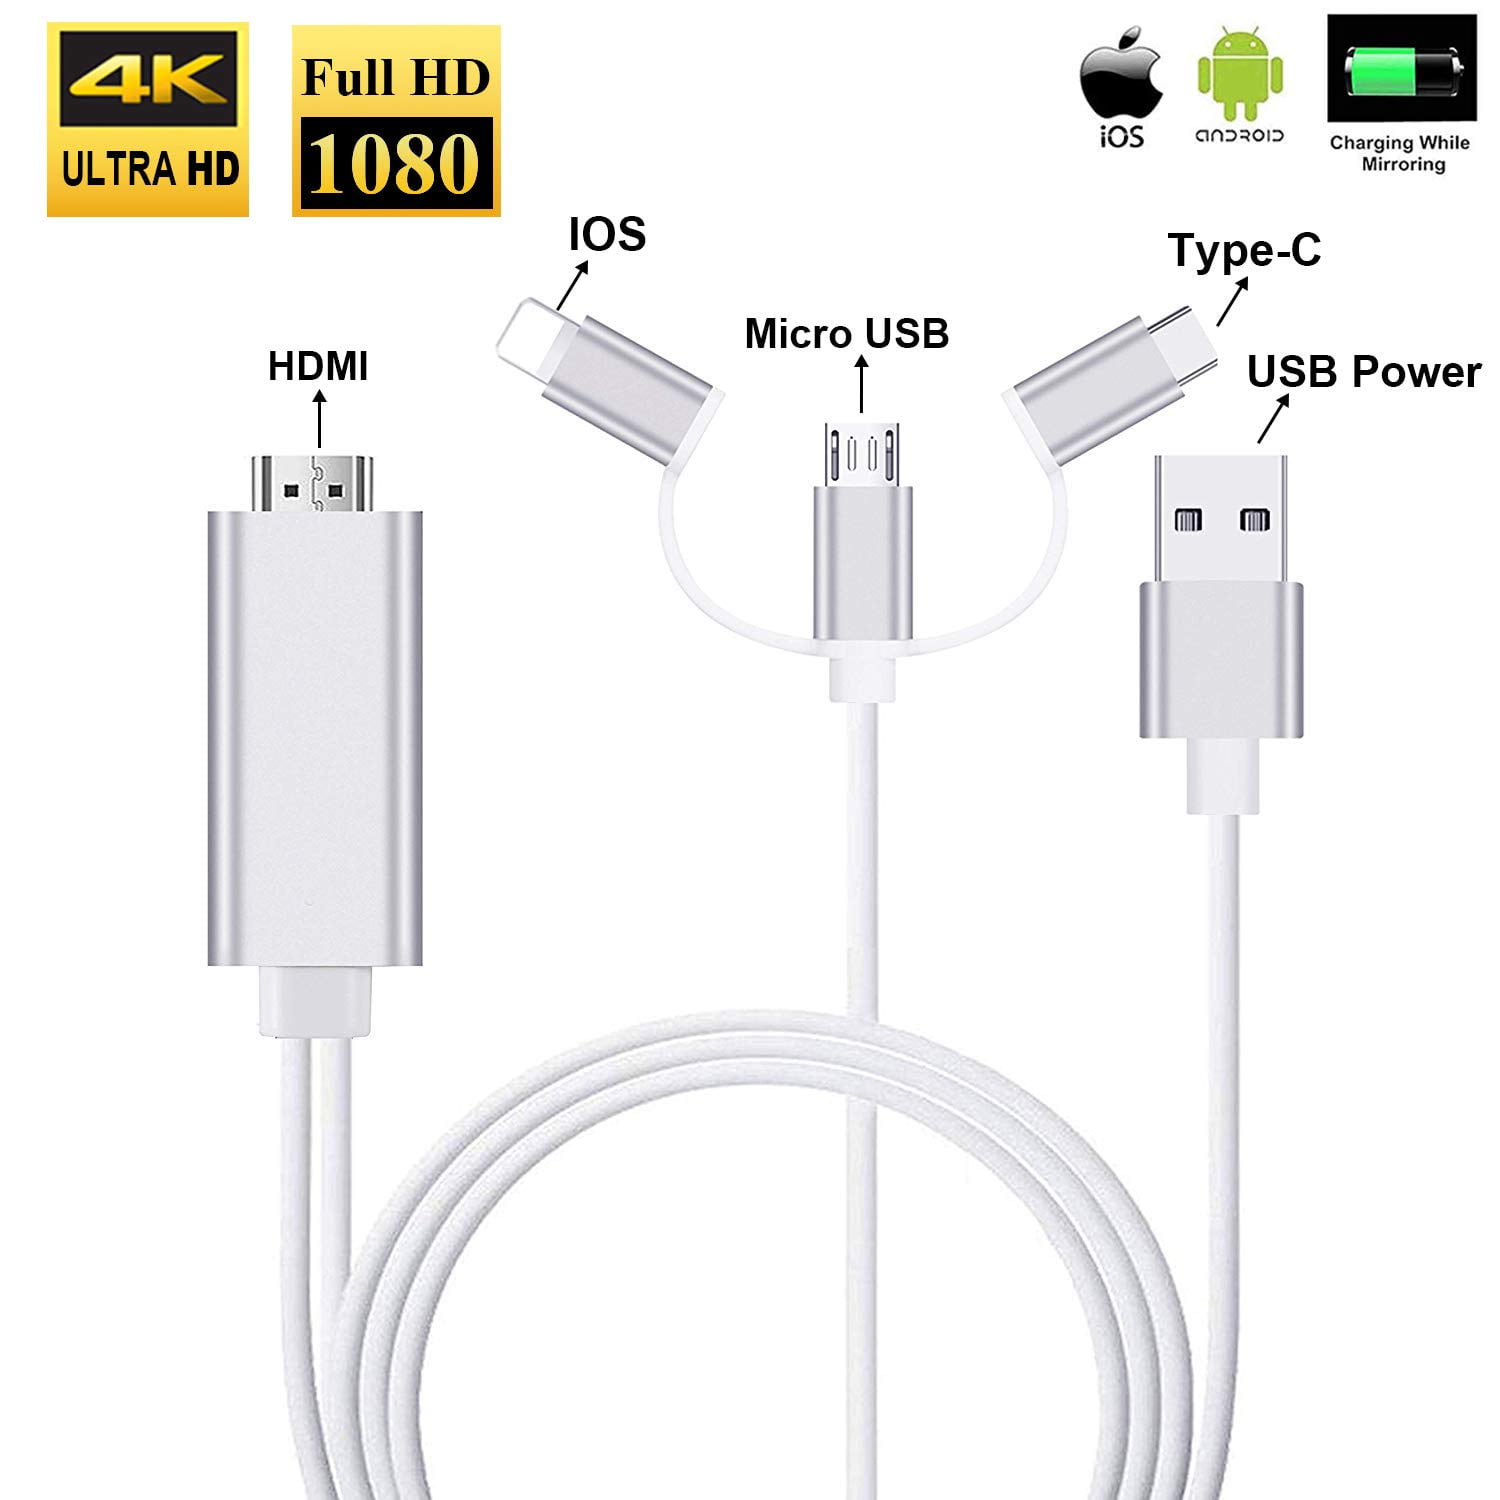 Compatible with iPhone to HDMI Adapter Cable, 3 in 1 HDMI/Micro USB/TYPE C Adapter, 1080P HDTV Converter for iPhone Xs Max XR X 8 7 6 Plus iPad Android Galaxy -